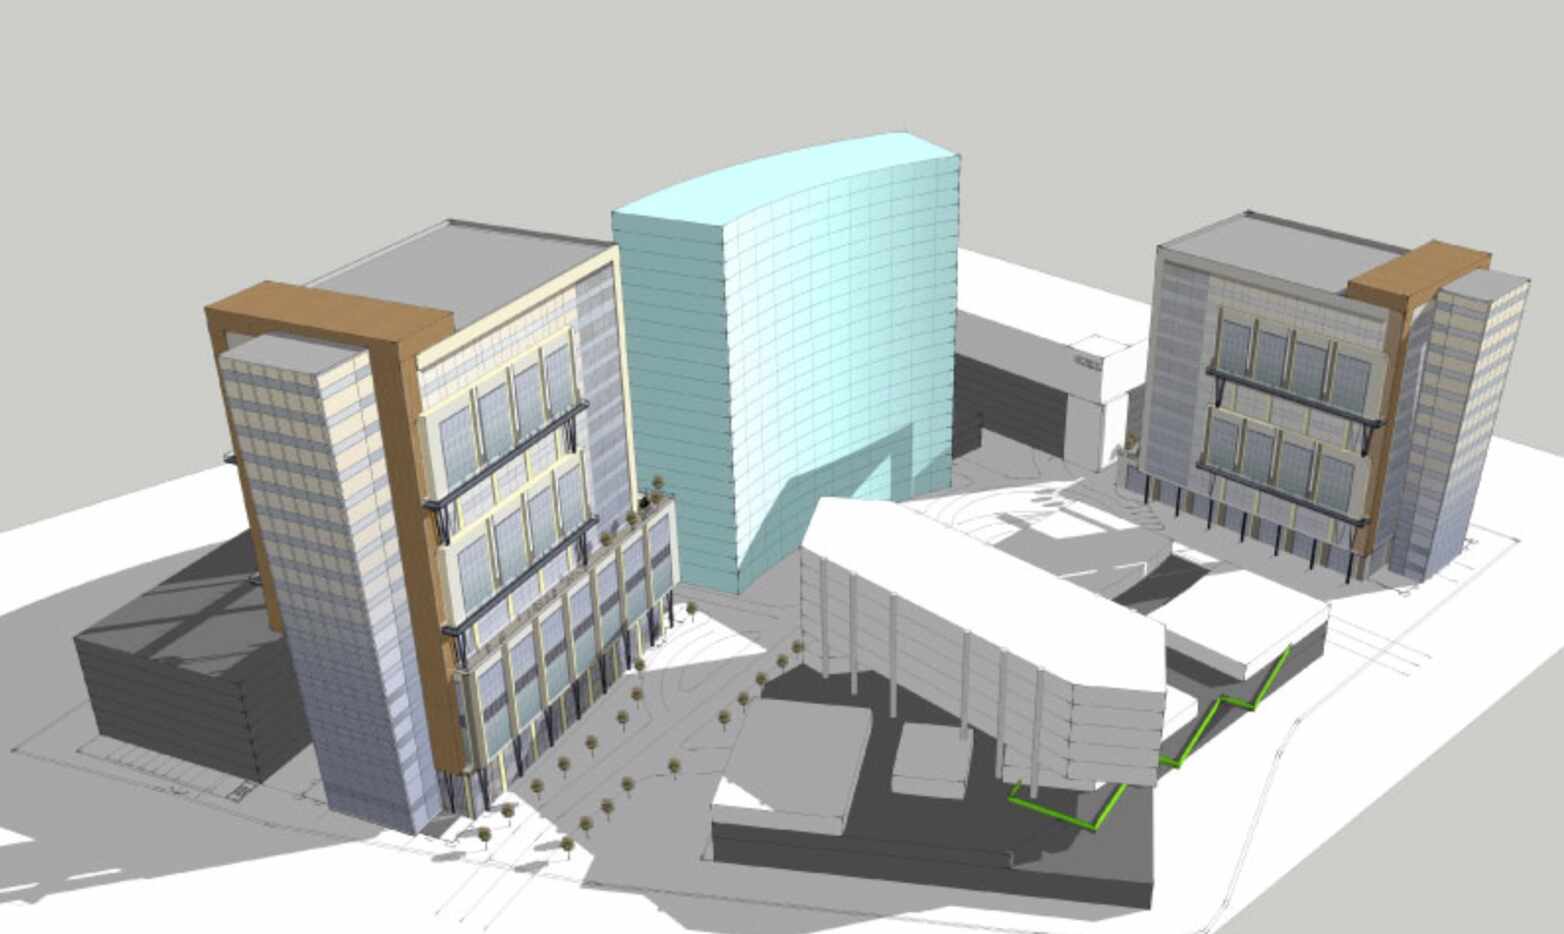 De La Vega Development has drawn up preliminary plans for a high-rise mixed-use project on...